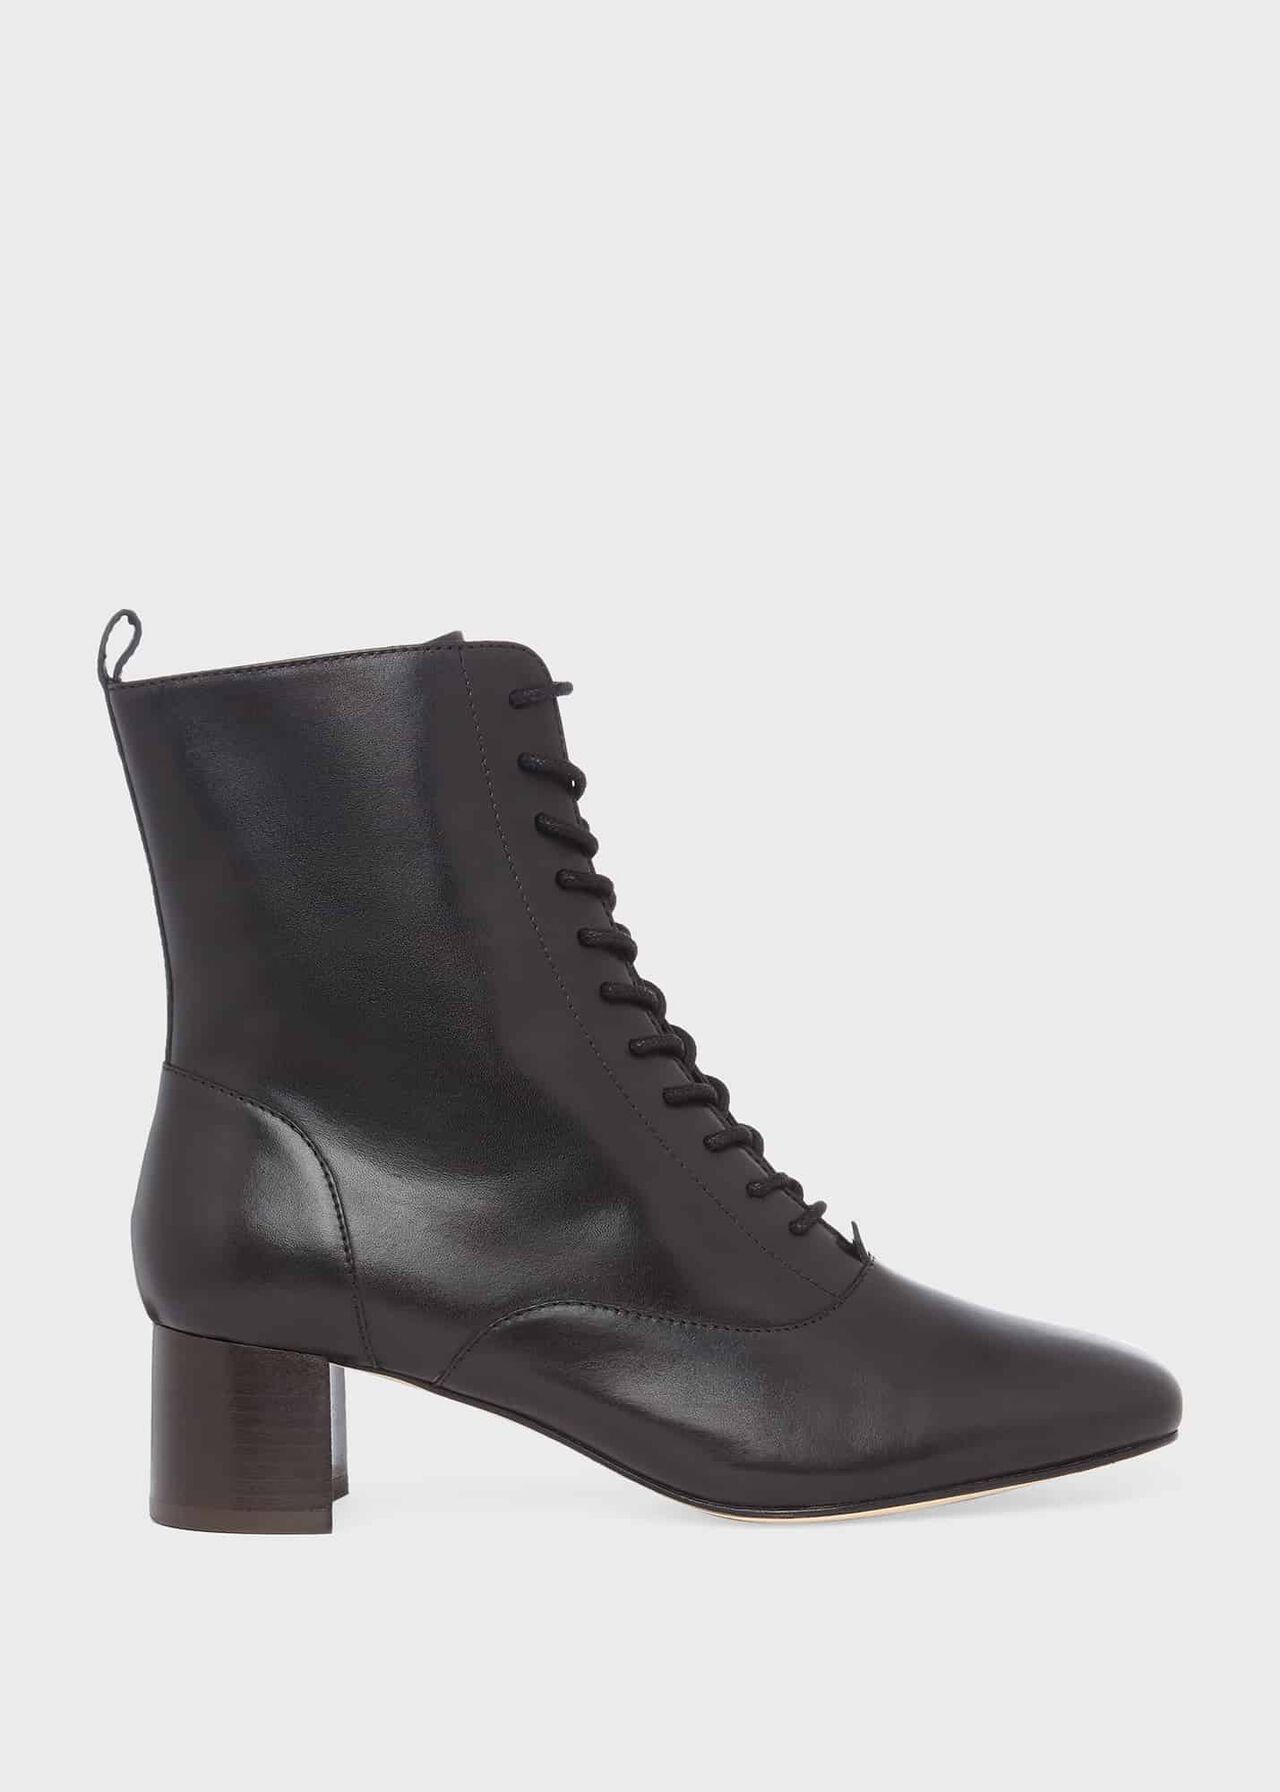 Issy Leather Lace Up Ankle Boots, Black, hi-res